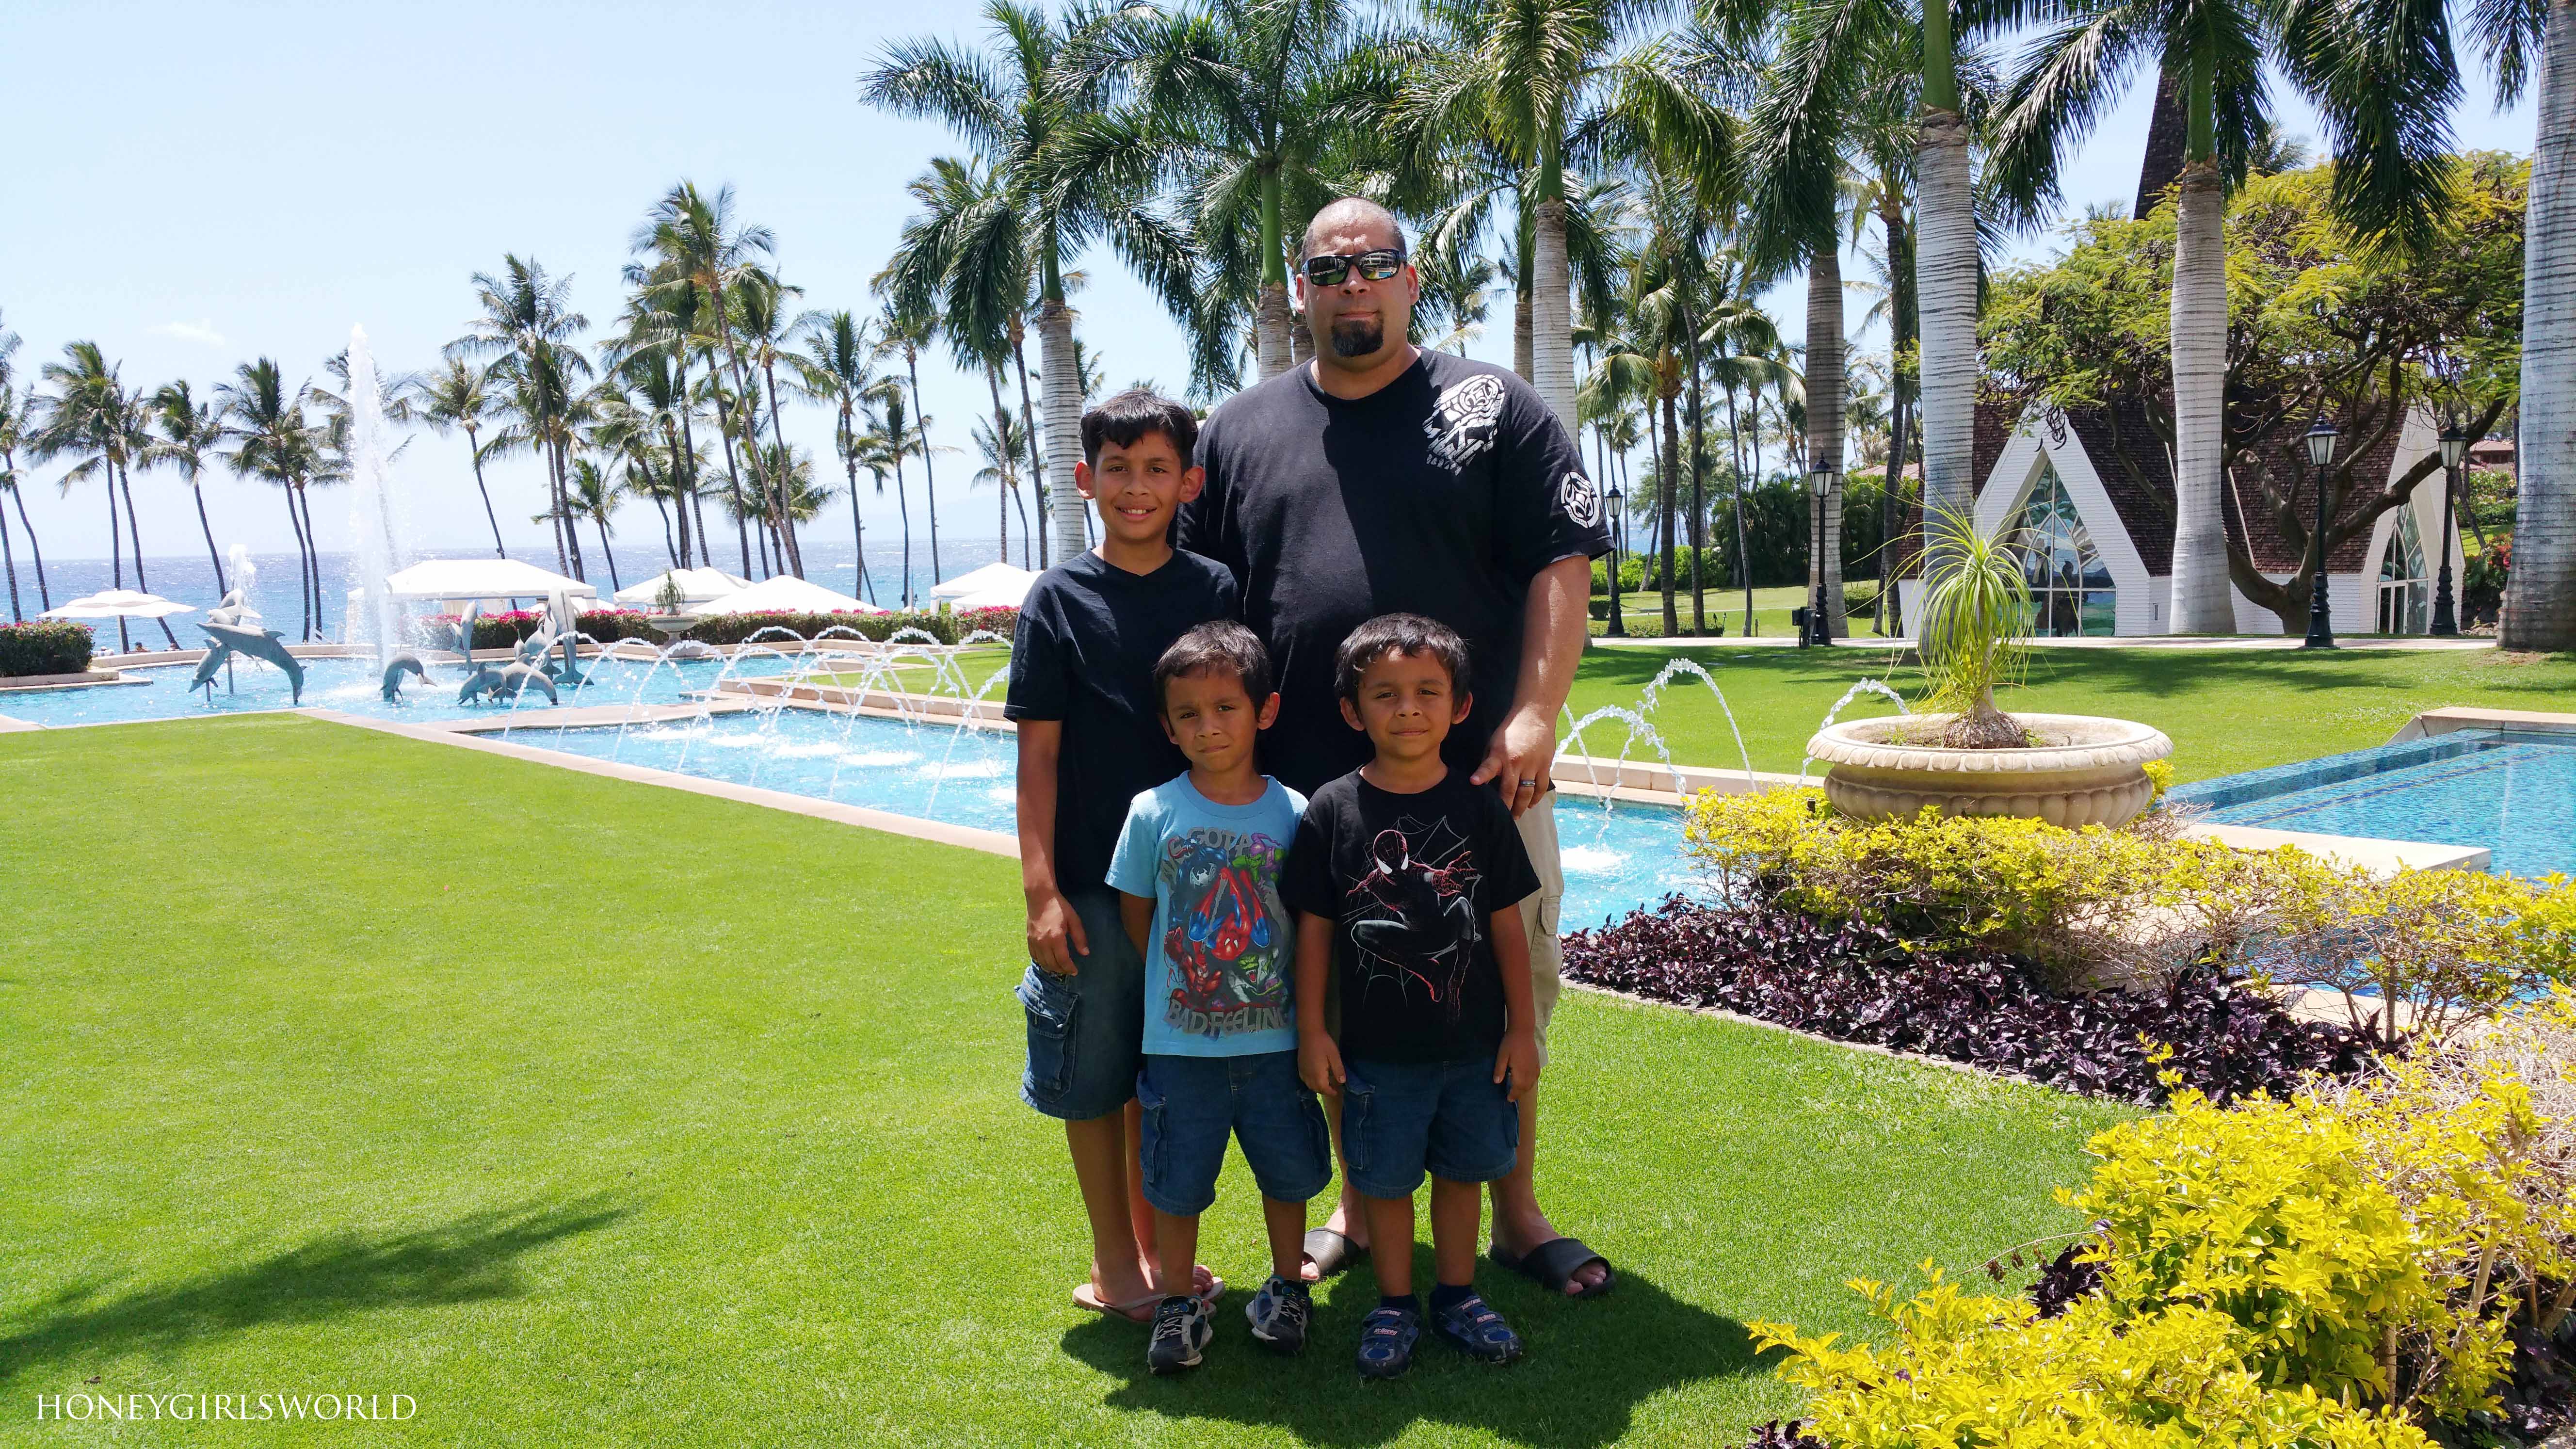 Foodie & Fashion Friday - Mother's Day Recap at the Grand Wailea Resort Waldorf Astoria, Grand Wailea A Waldorf Astoria Resort http://honeygirlsworld.com